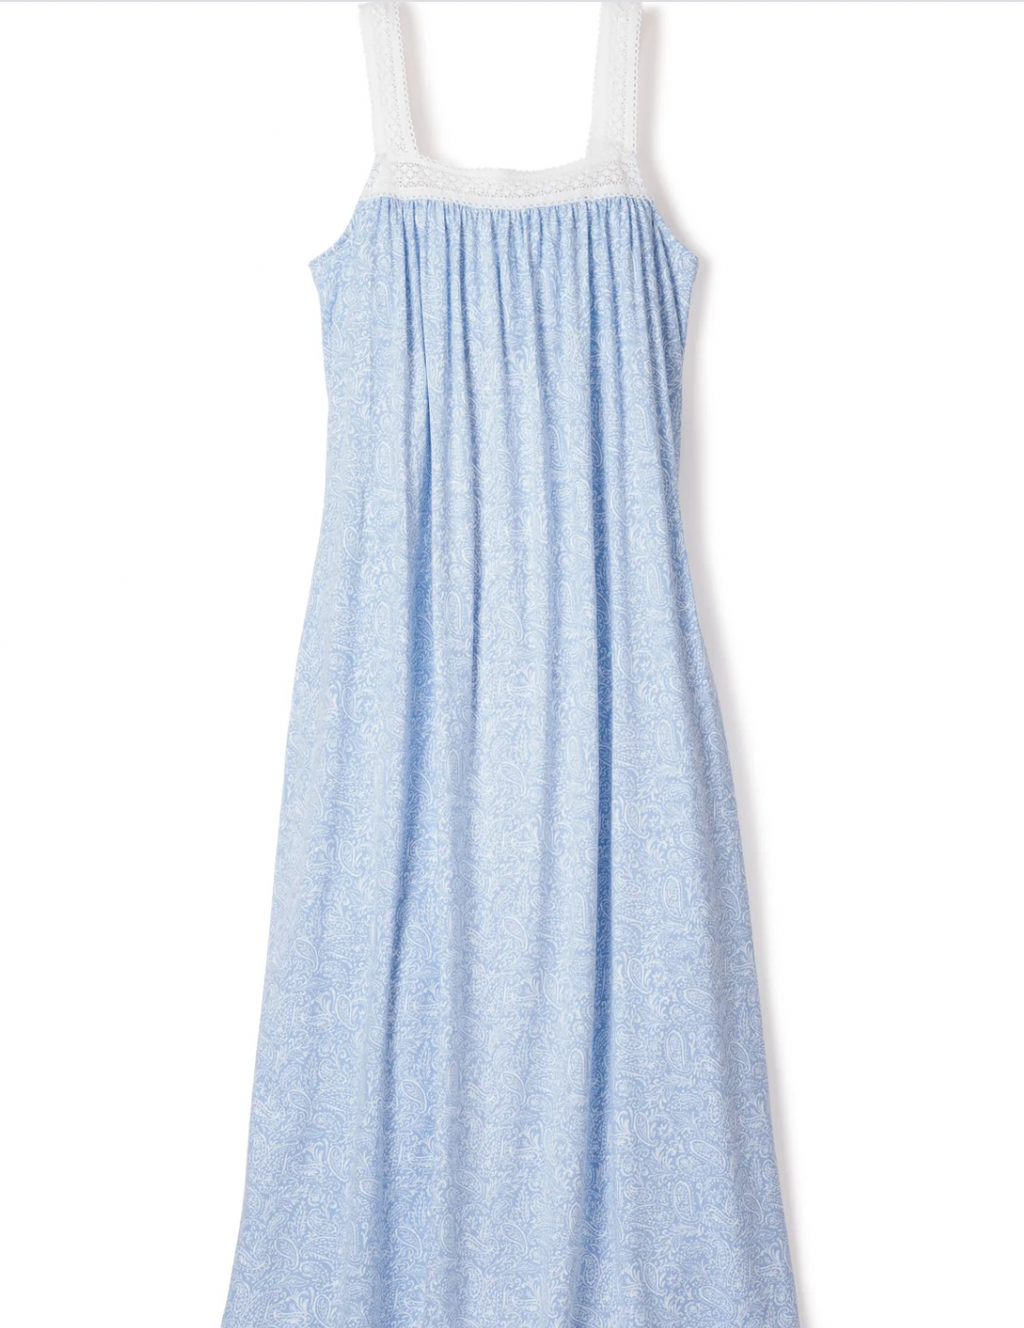 Petite Plume Luxe Pima Camille Nightgown in Periwinkle Paisley